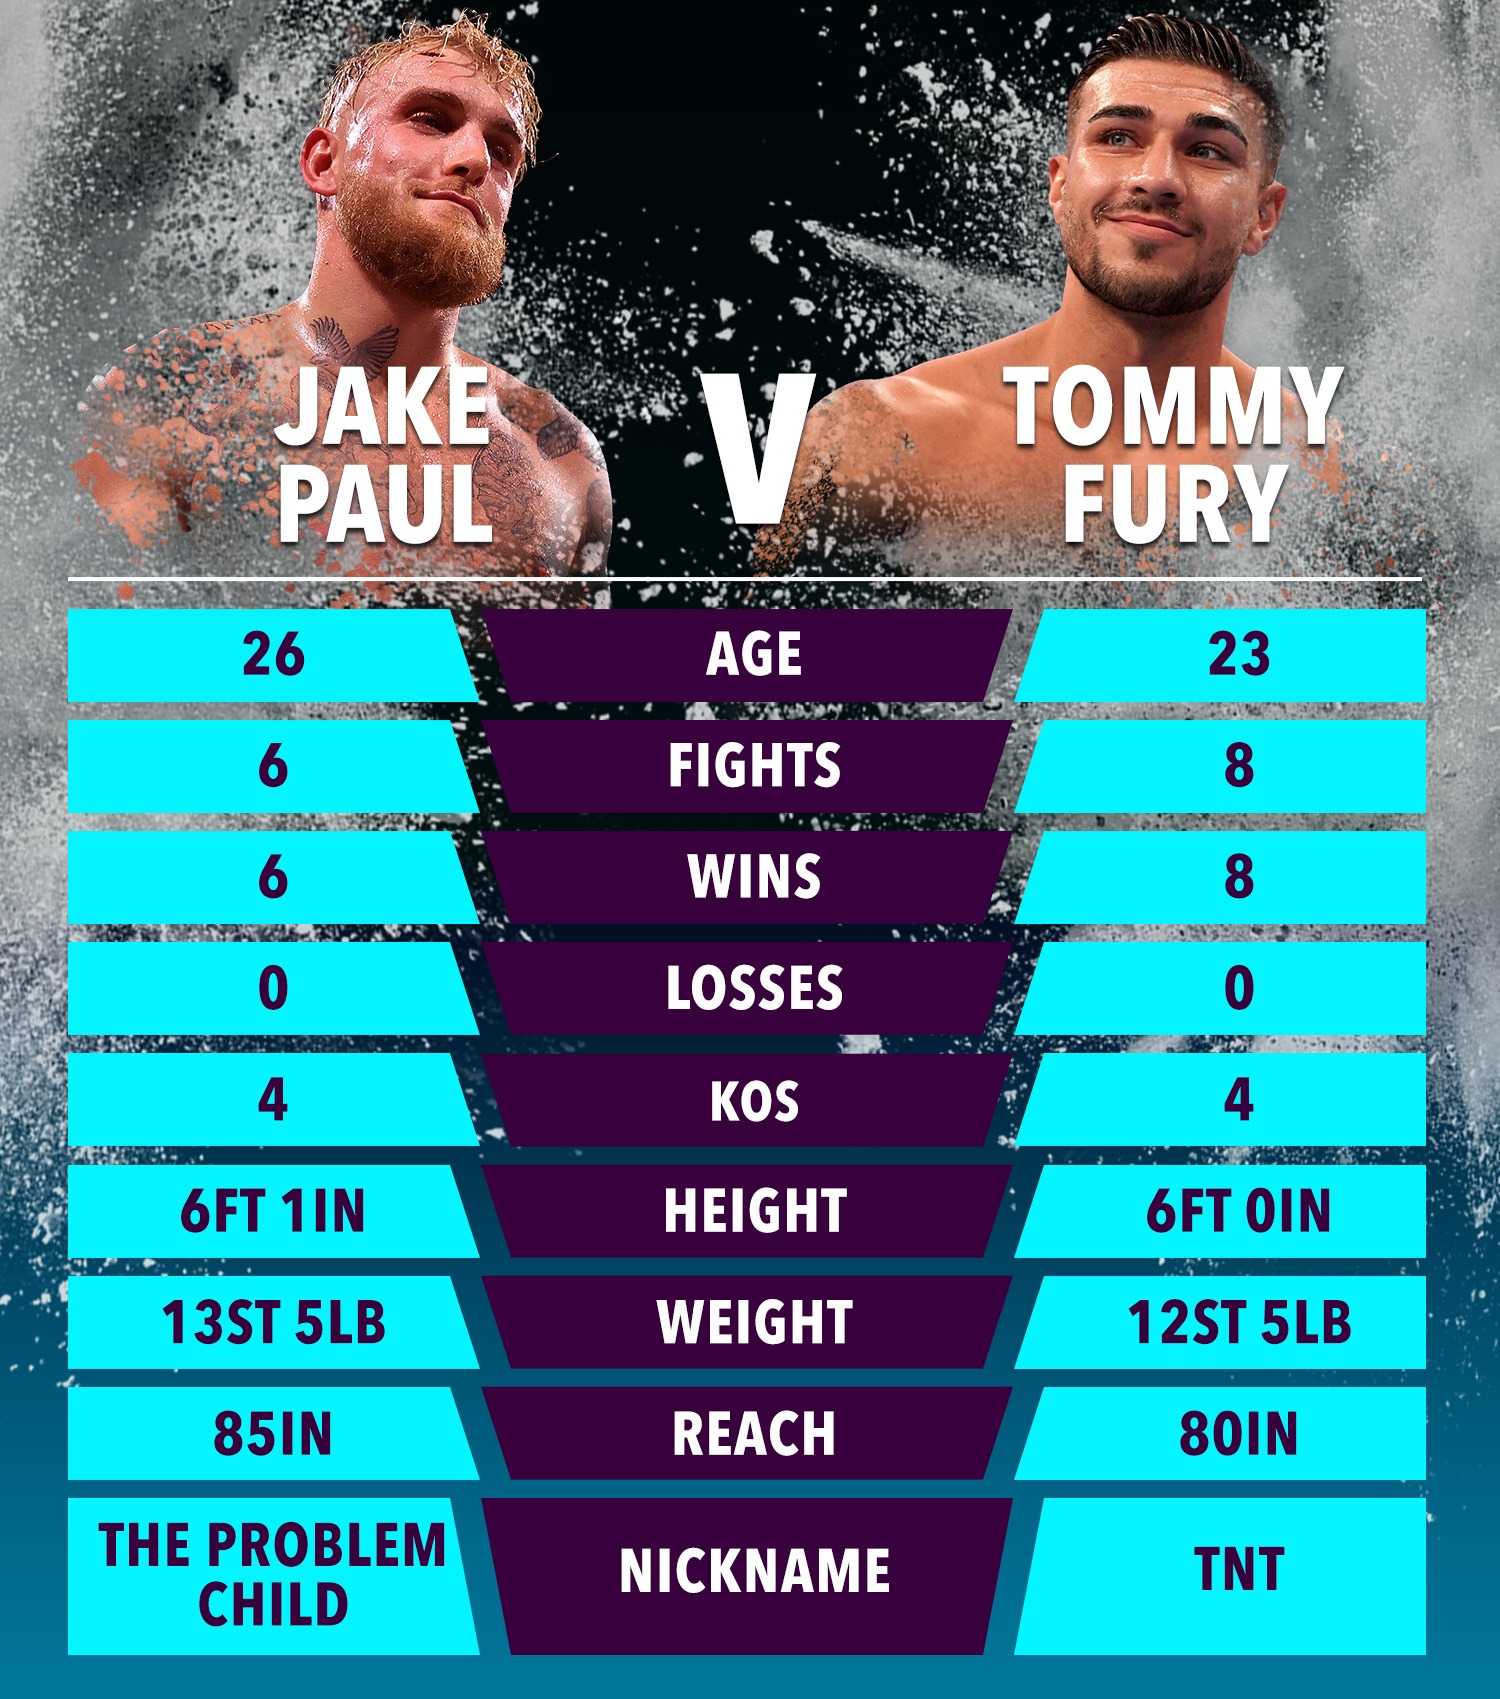 , Jake Paul will mess with Tommy Fury mentally and beat him before the fight, says Eddie Hearn as he reveals prediction